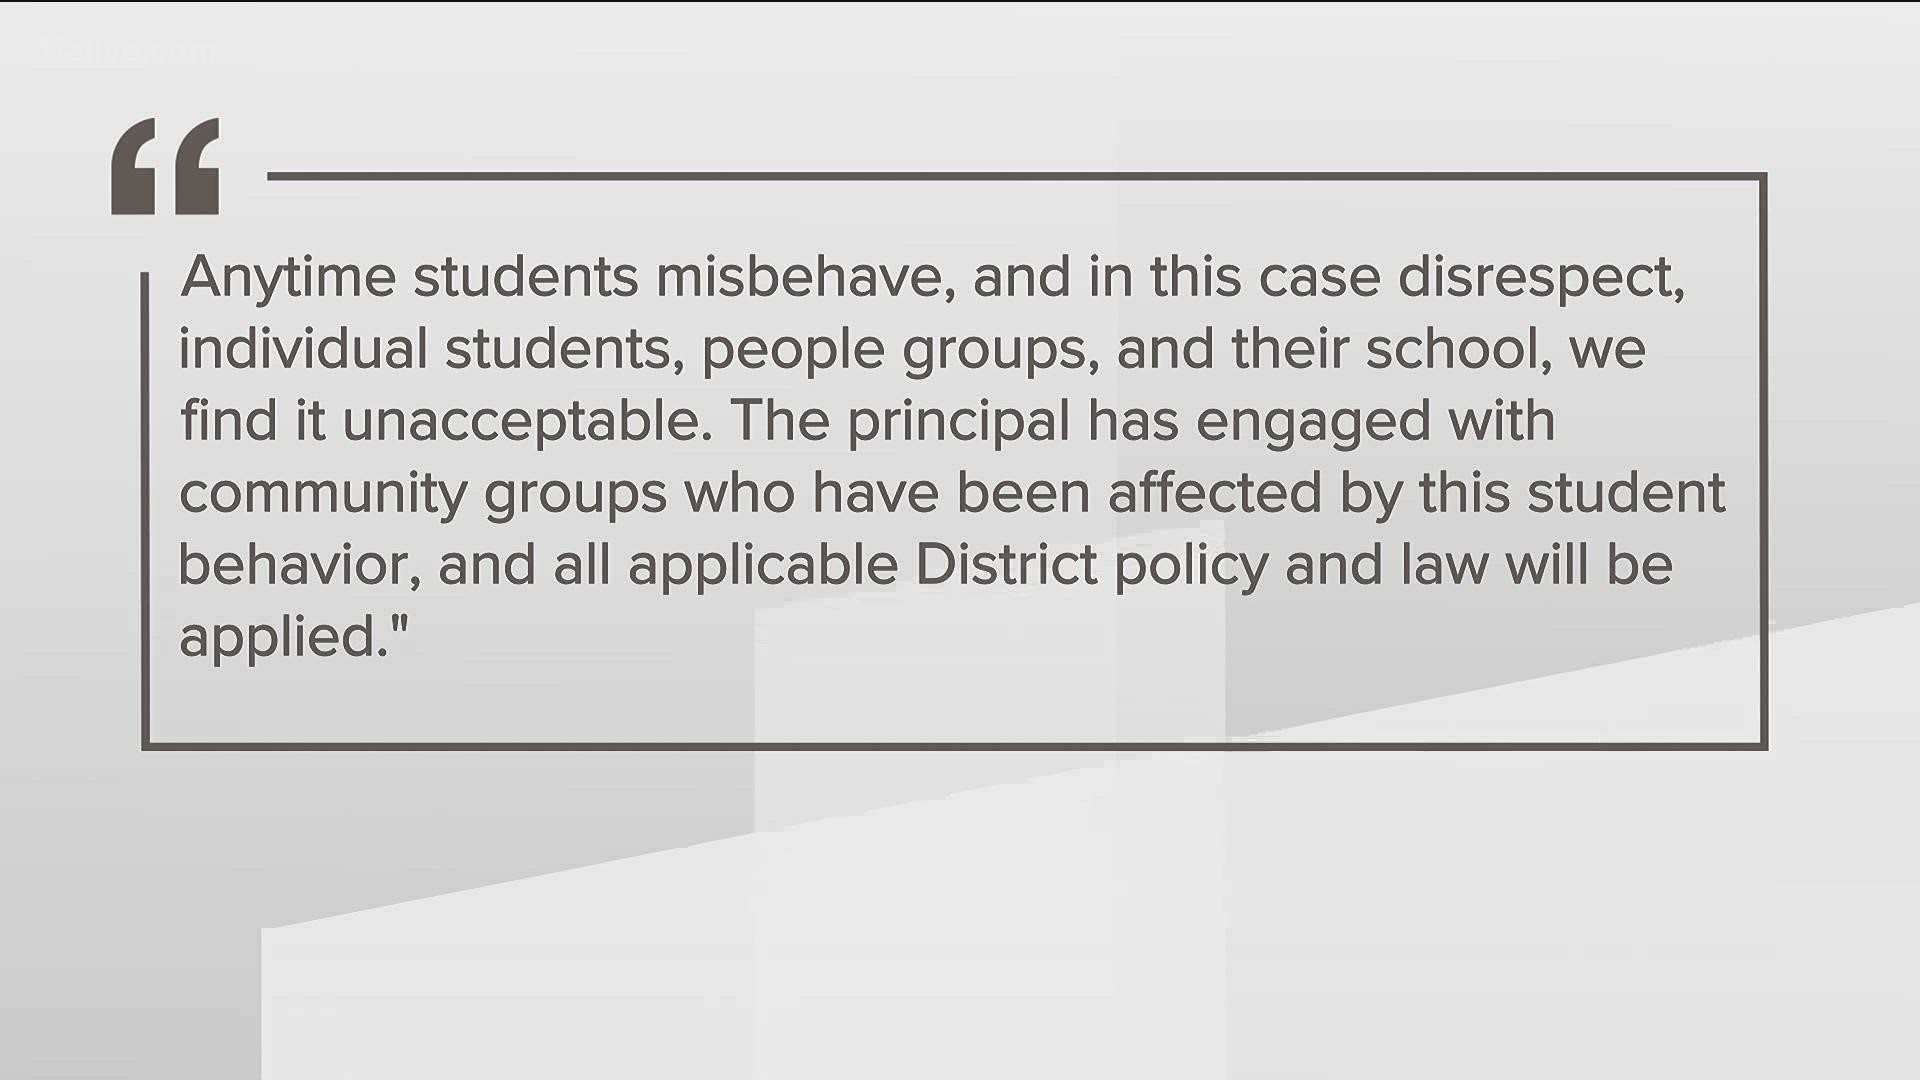 A district spokesperson issued a statement Tuesday about the defacement and the school's disciplinary actions.